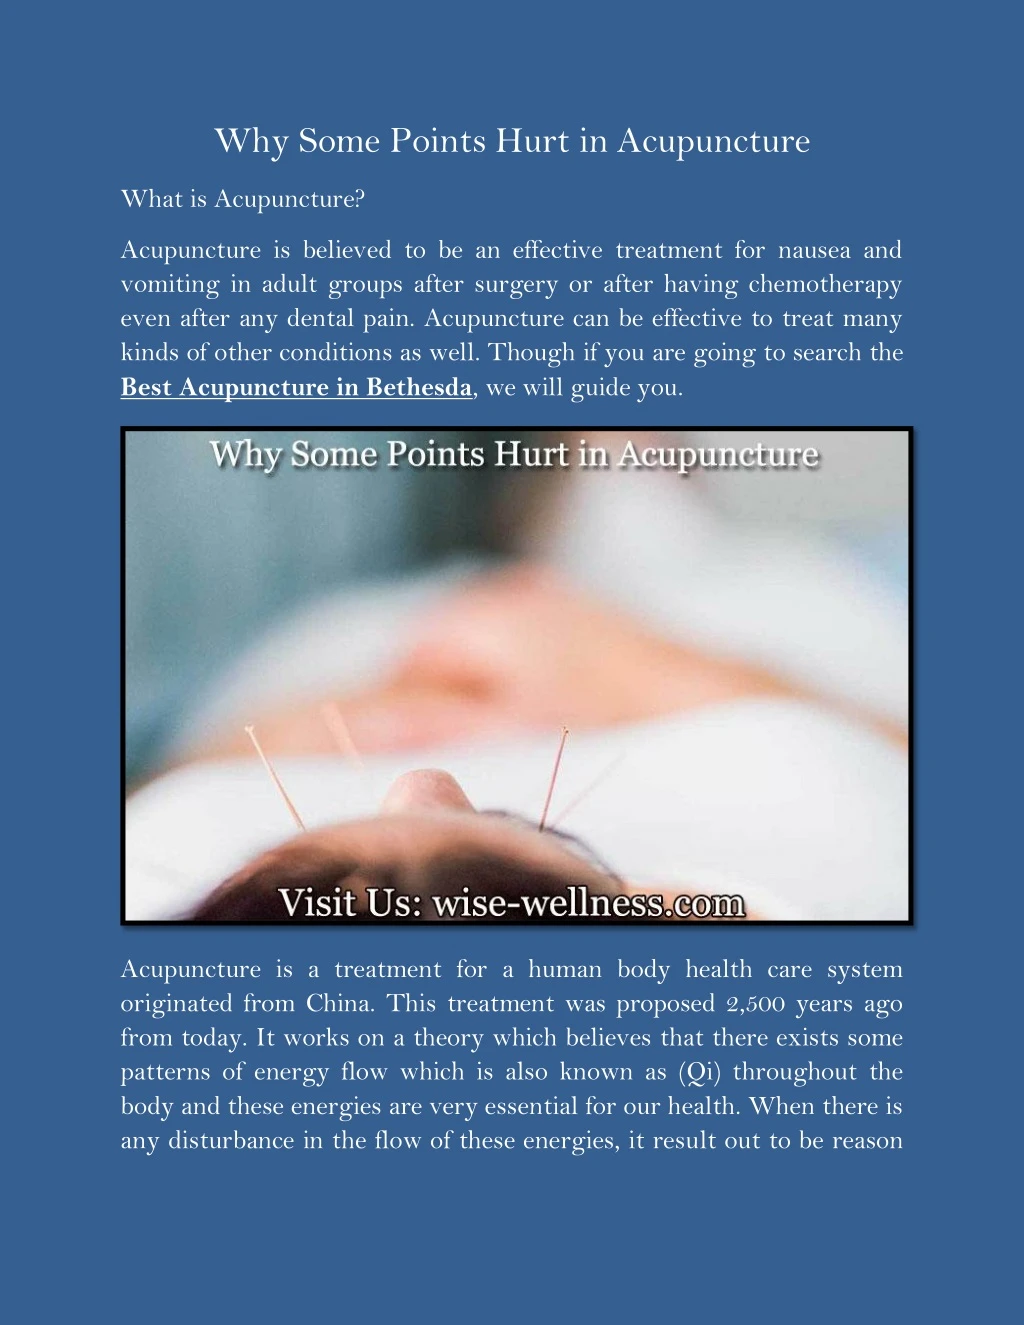 why some points hurt in acupuncture